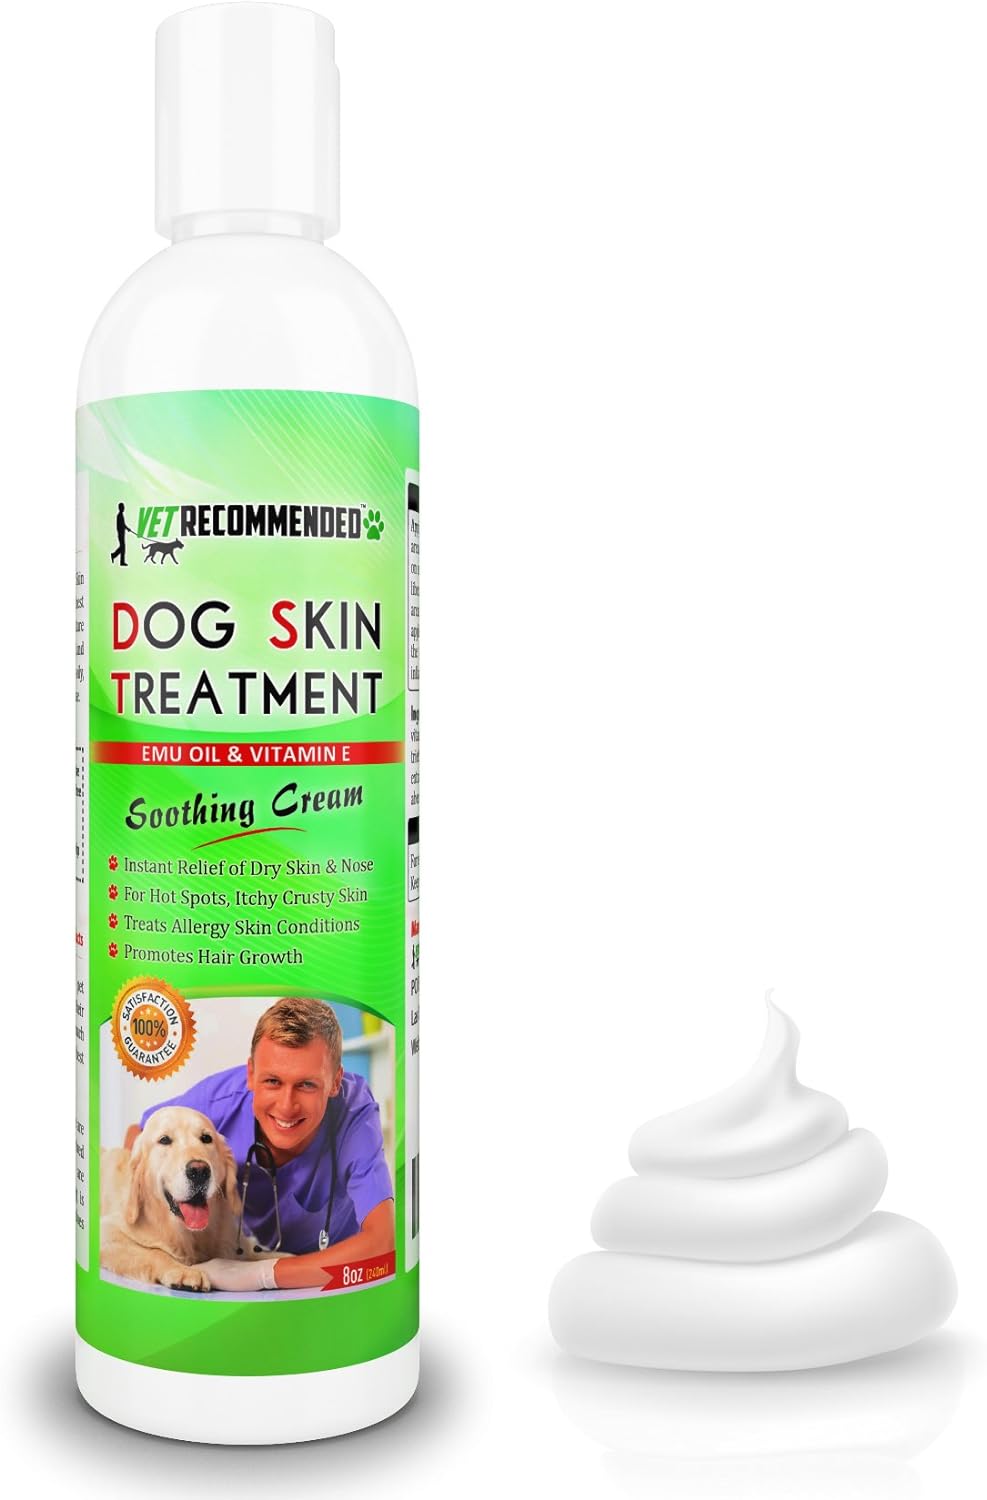 Dog Dry Skin Cream & Moisturizer - Helps Dog Hair Loss Regrowth - Dry Nose & Cracked Paws - Works with Hot Spots for Dogs - 240ml (8 Oz)